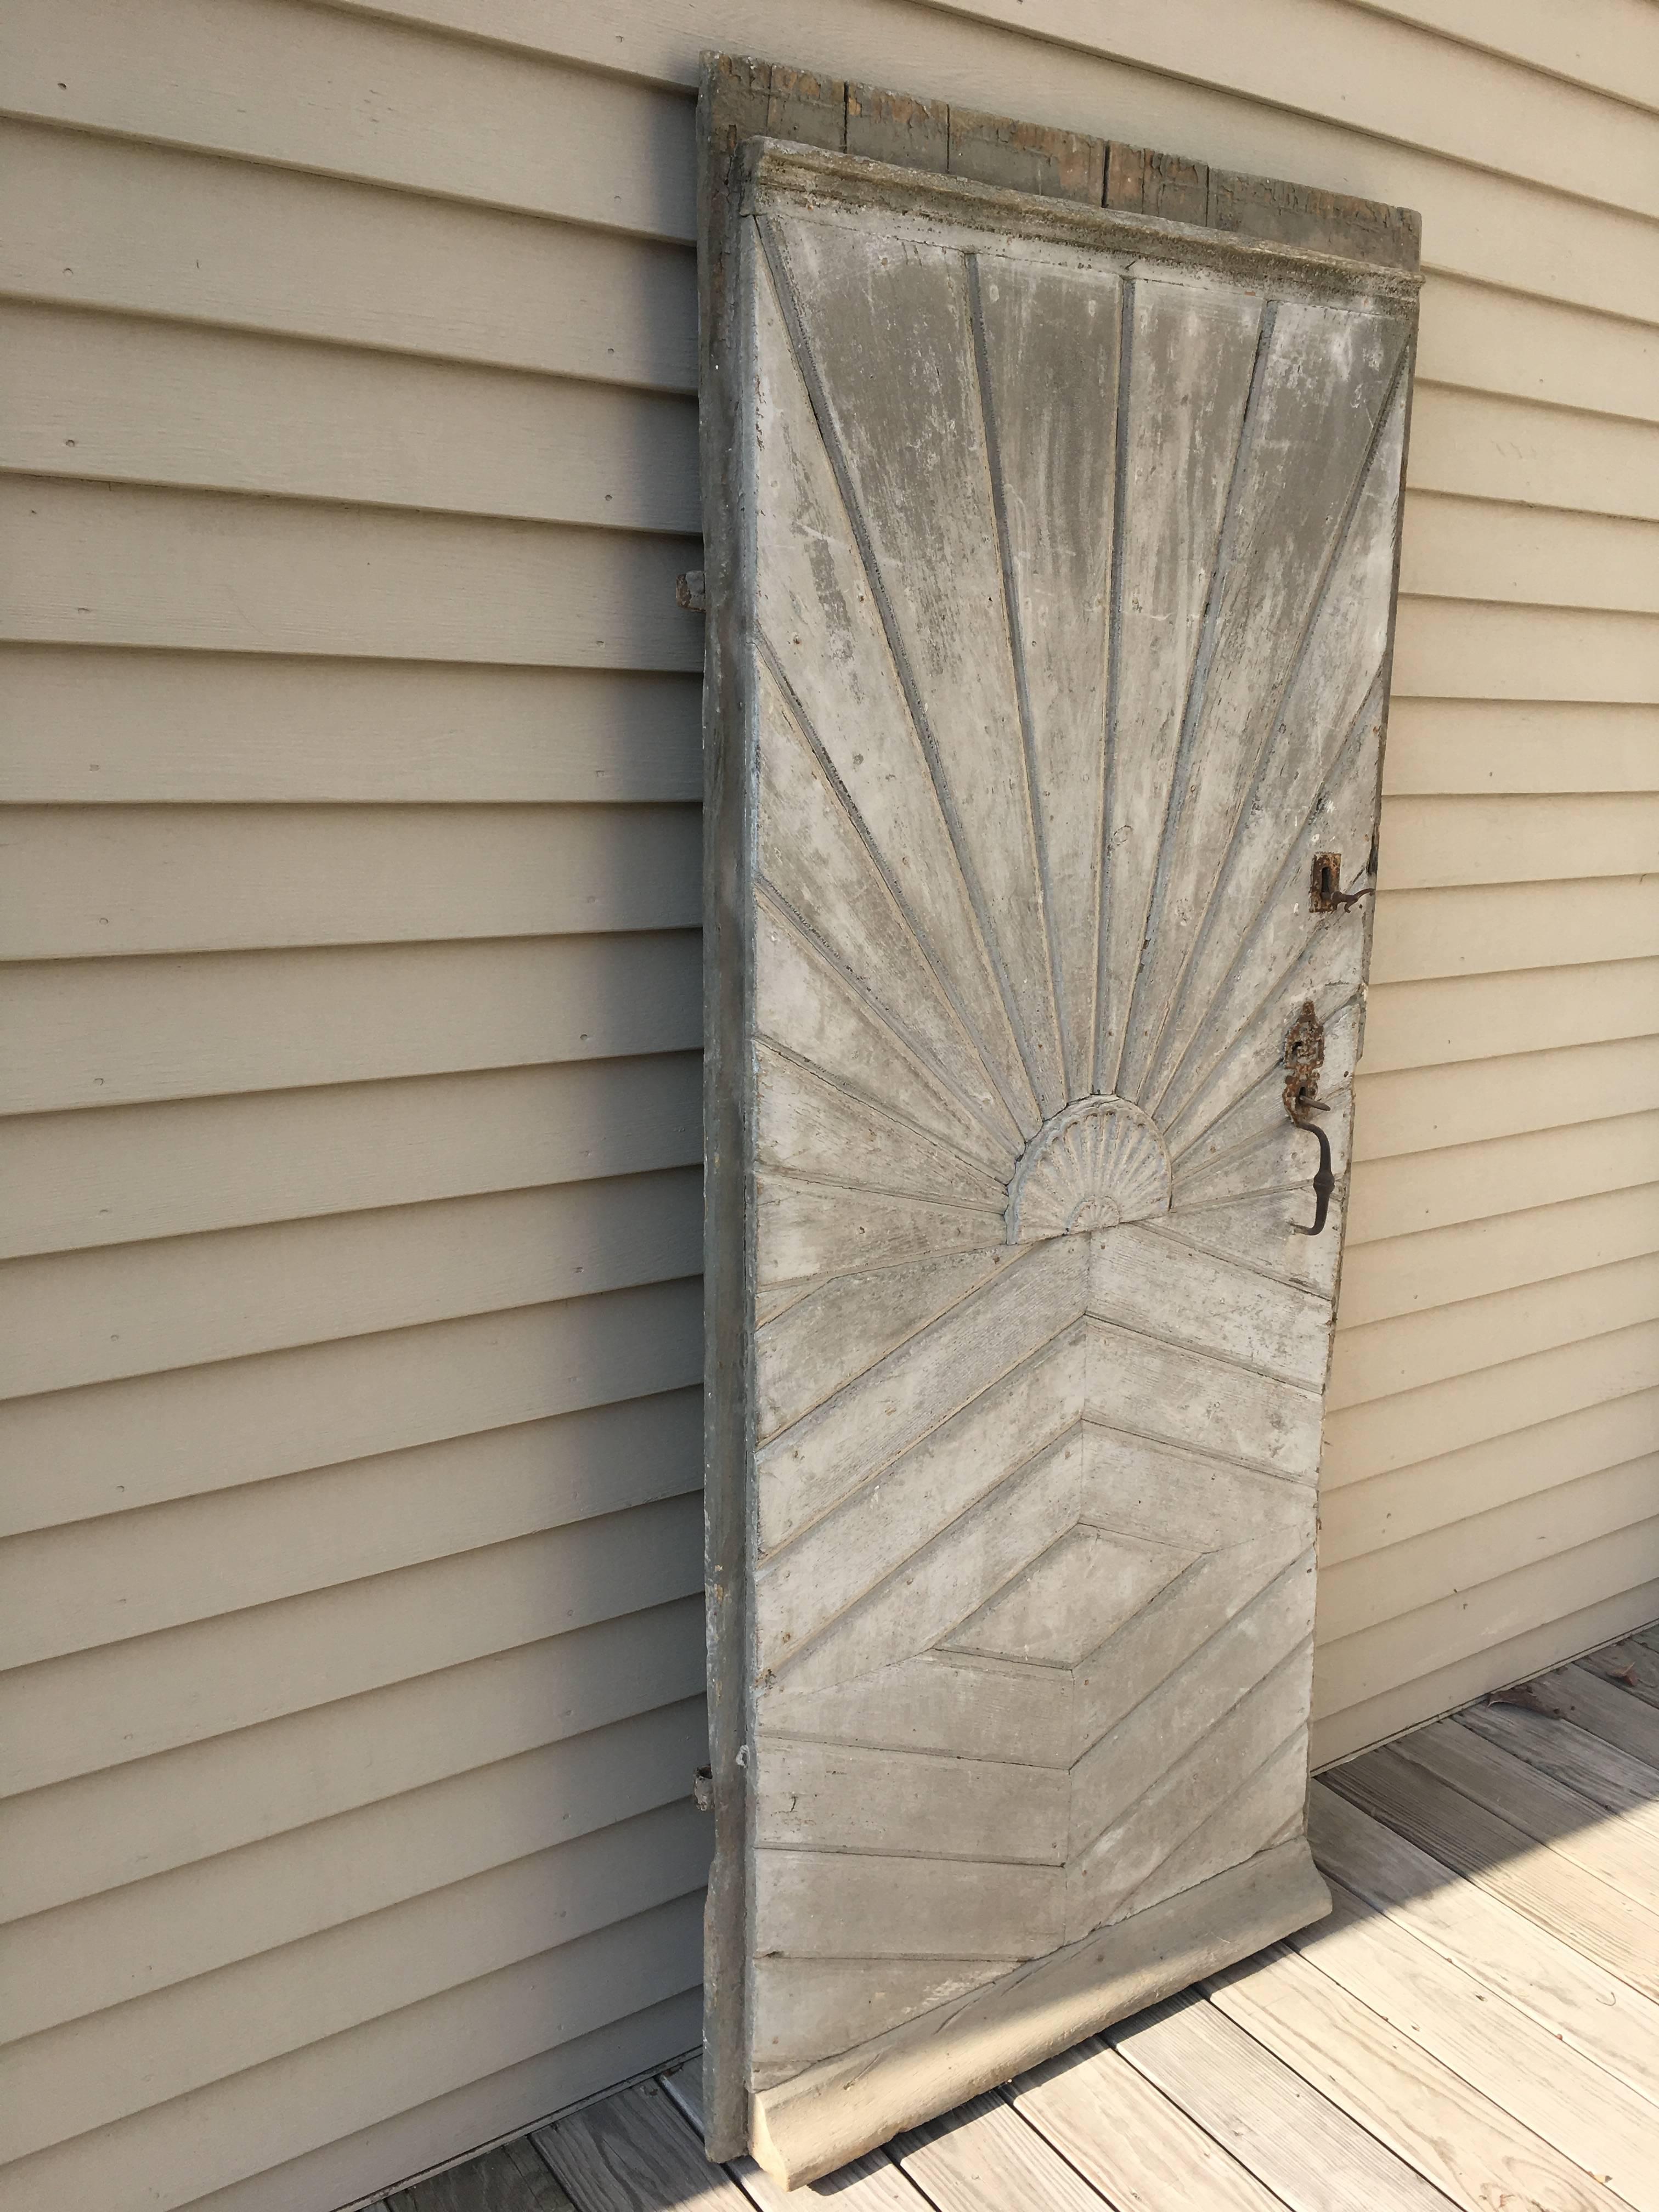 A stunning late 18th century oak and pine door with all original hand-forged strap hinges, iron lock, and keys, this sunburst and chevron-designed door would make a wonderful entrance to your secret garden. Old very pale grey paint on the exterior